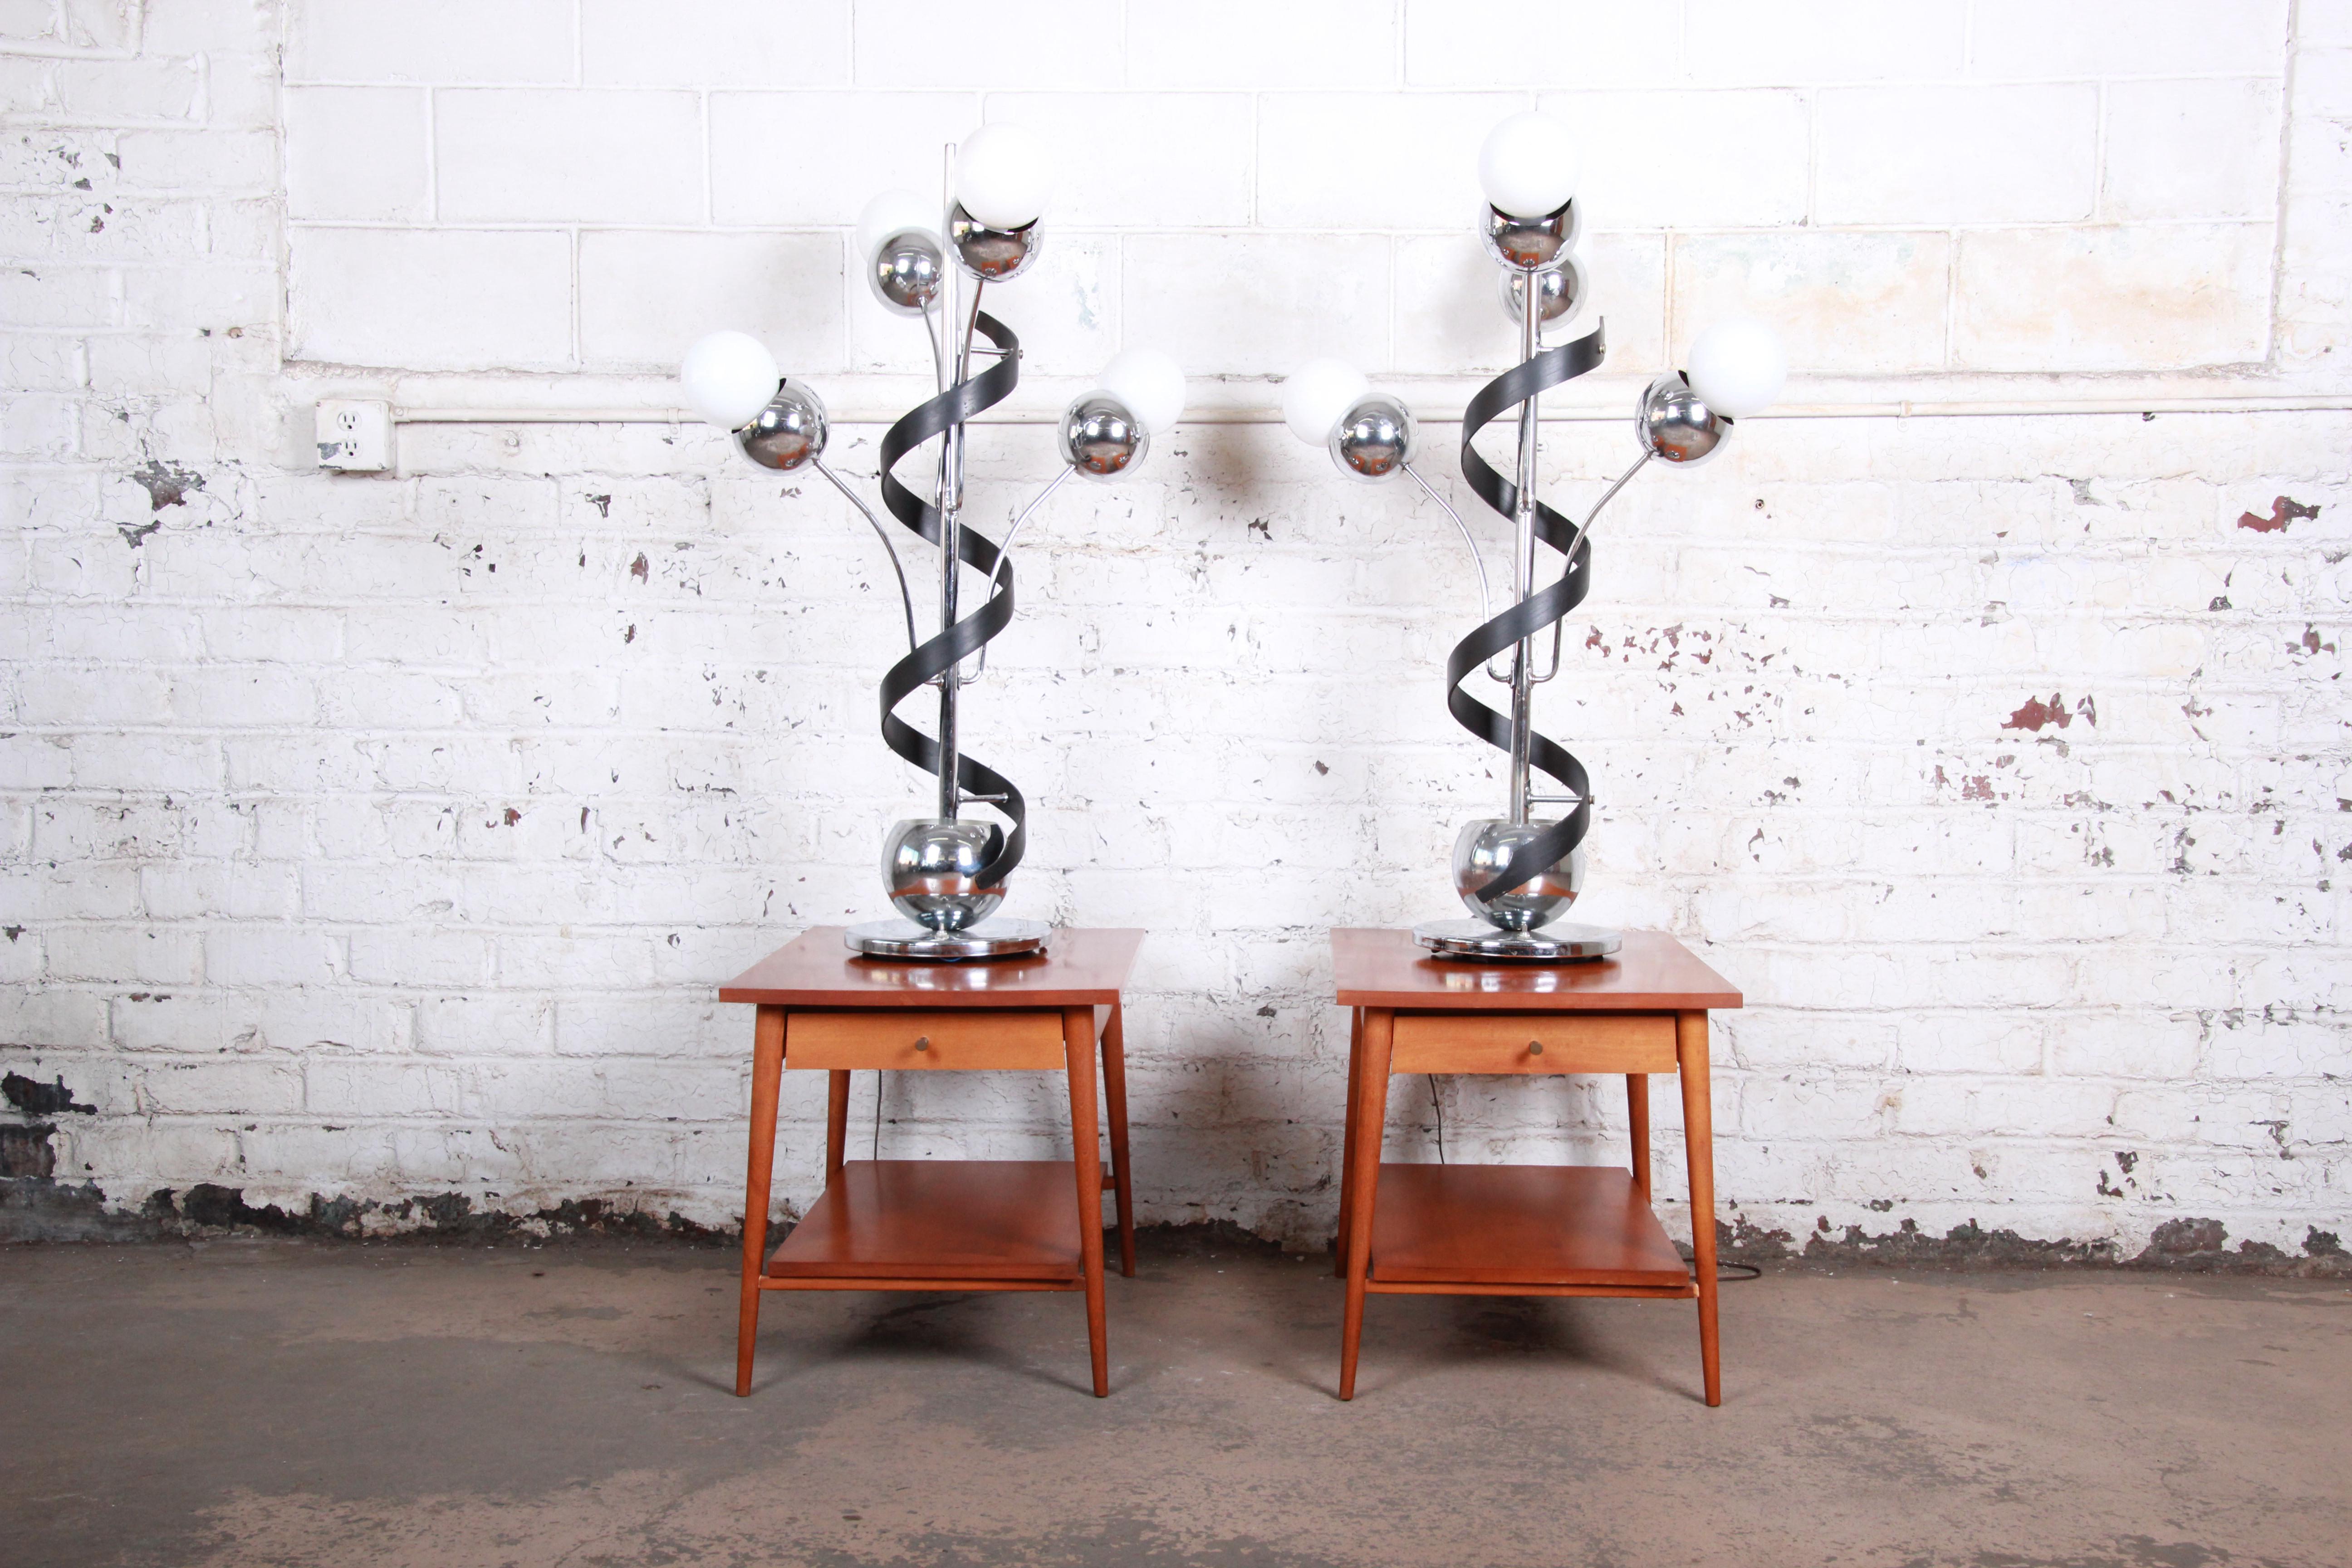 An exceptional pair of oversized Torino style Mid-Century Modern Space Age Sputnik table lamps. The lamps feature heavy chrome frames, each with four arms and a unique ebonized bentwood corkscrew design. They offer three-way lighting, and each lamp